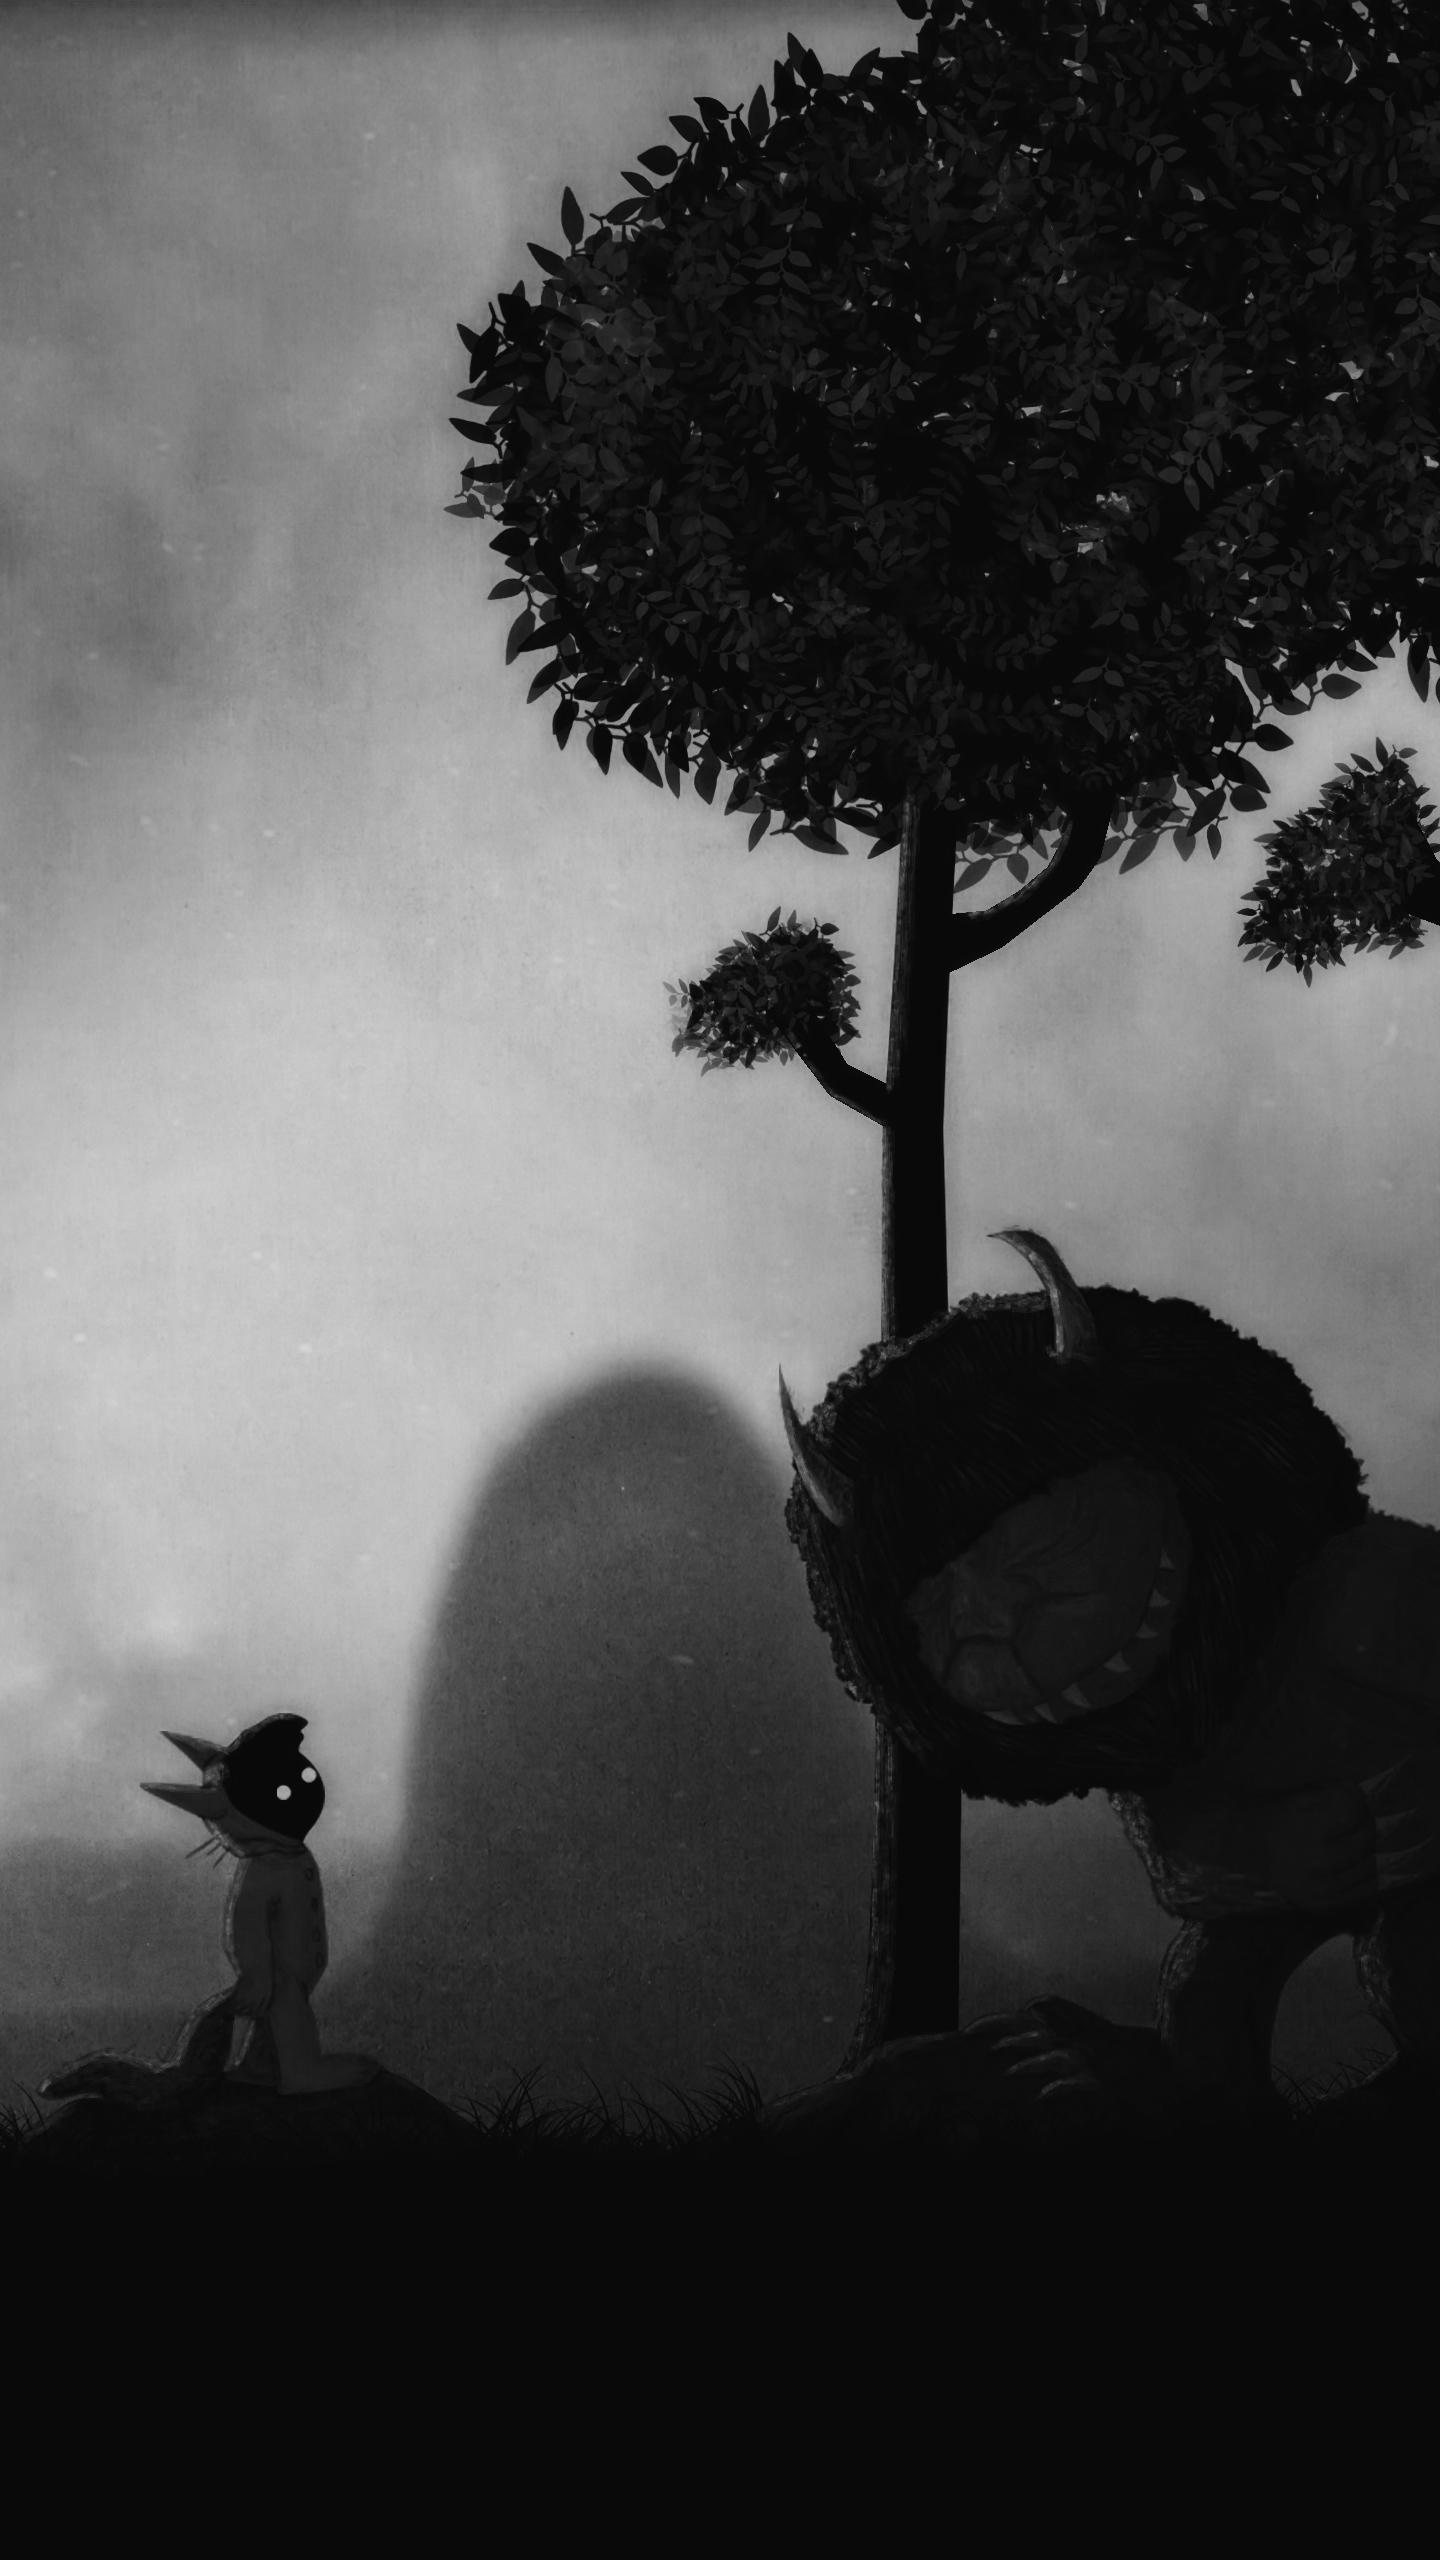 video game, crossover, where the wild things are, limbo (video game)